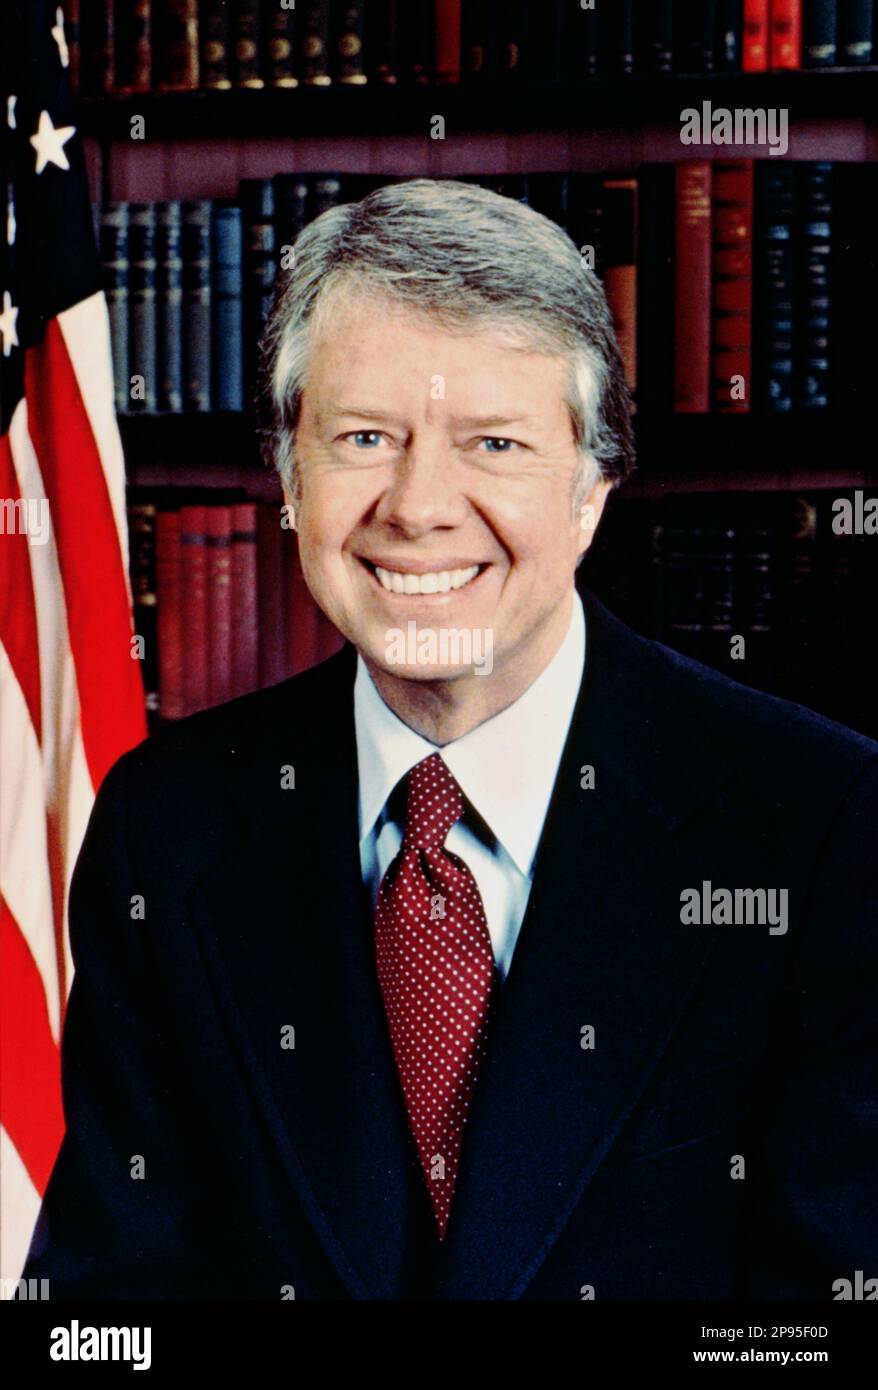 1977, 31 january , USA :  James Earl ' Jimmy ' Carter, Jr. (born October 1, 1924) was the 39th President of the United States from 1977 to 1981, and the Nobel Peace laureate of 2002.Official photo by White House Press Office - Presidente della Repubblica - USA - ritratto - portrait - cravatta - tie - collar - colletto  - UNITED STATES  - STATI UNITI  - bandiera - flag - bandiere  ----  Archivio GBB Stock Photo